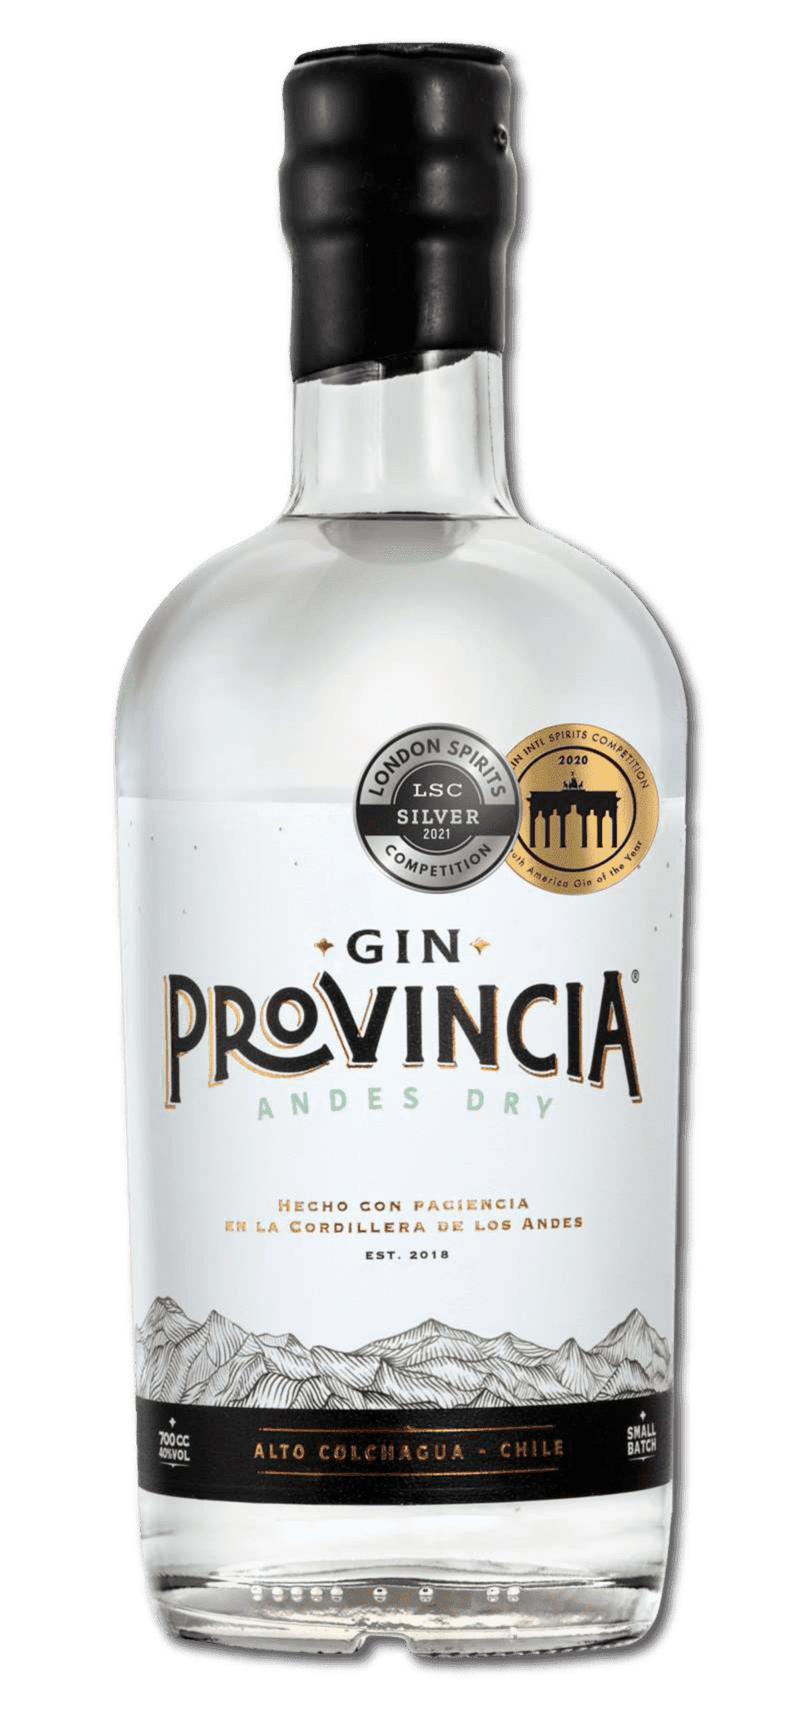 Gin Provincia Andes Dry